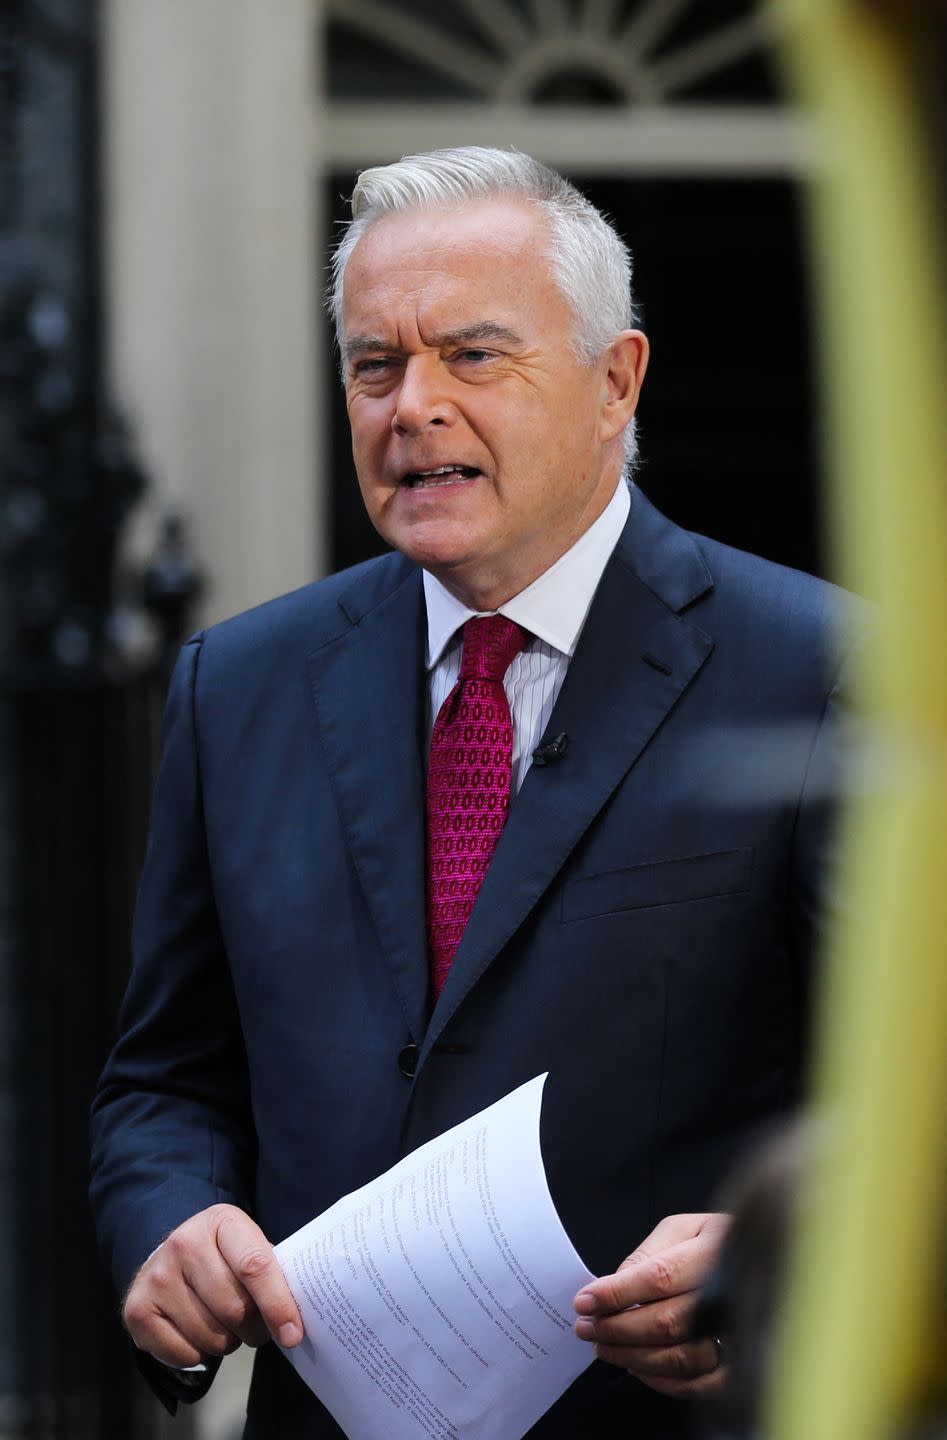 bbc journalist huw edwards speaks in front of a camera in downing street